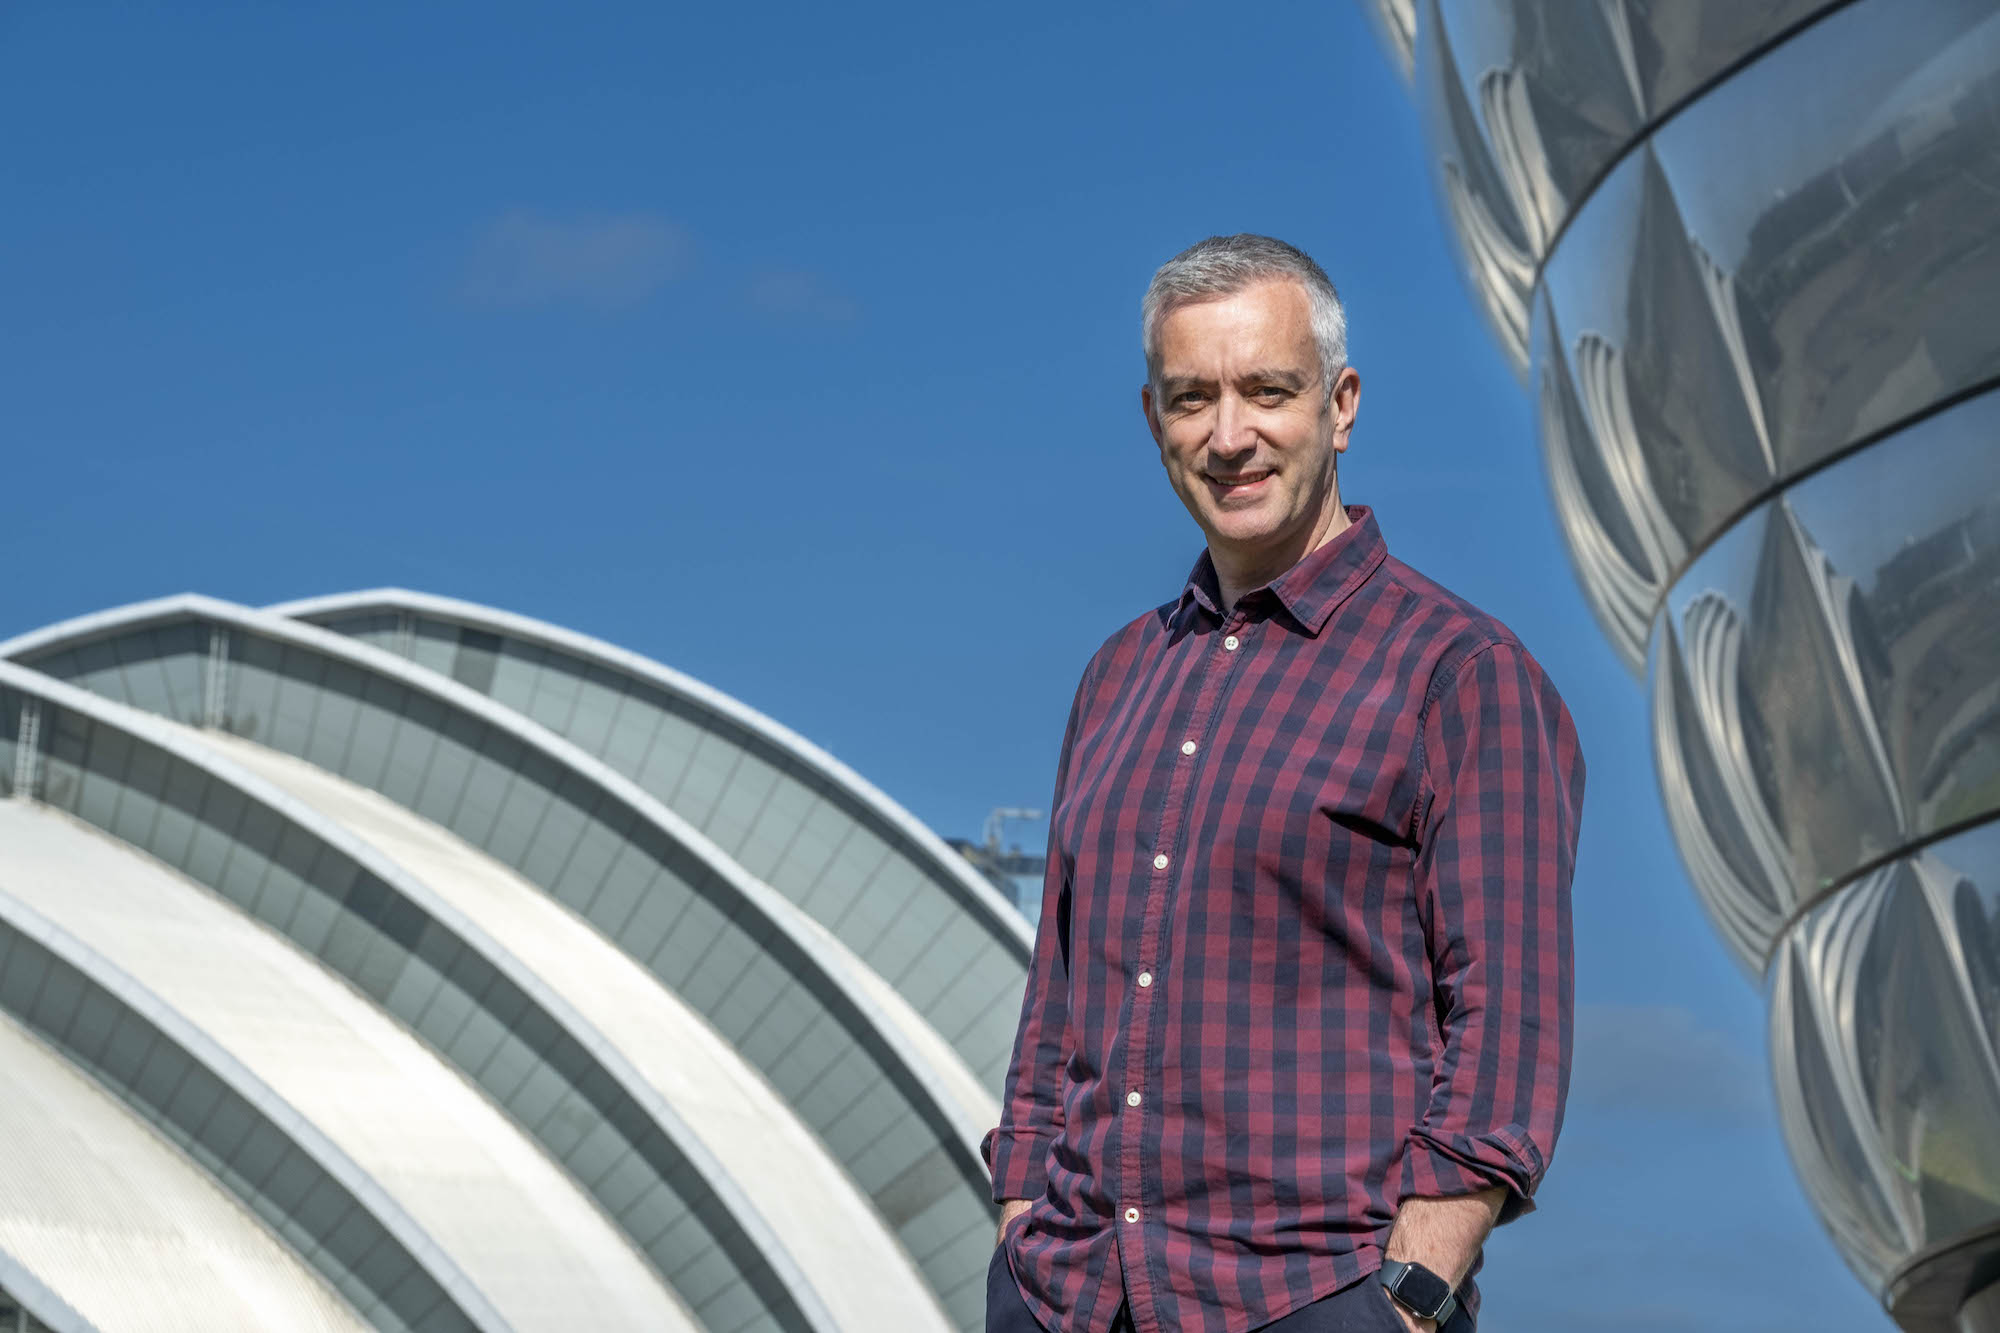 Glasgow's SEC appoints Colin Hartley as director of operations